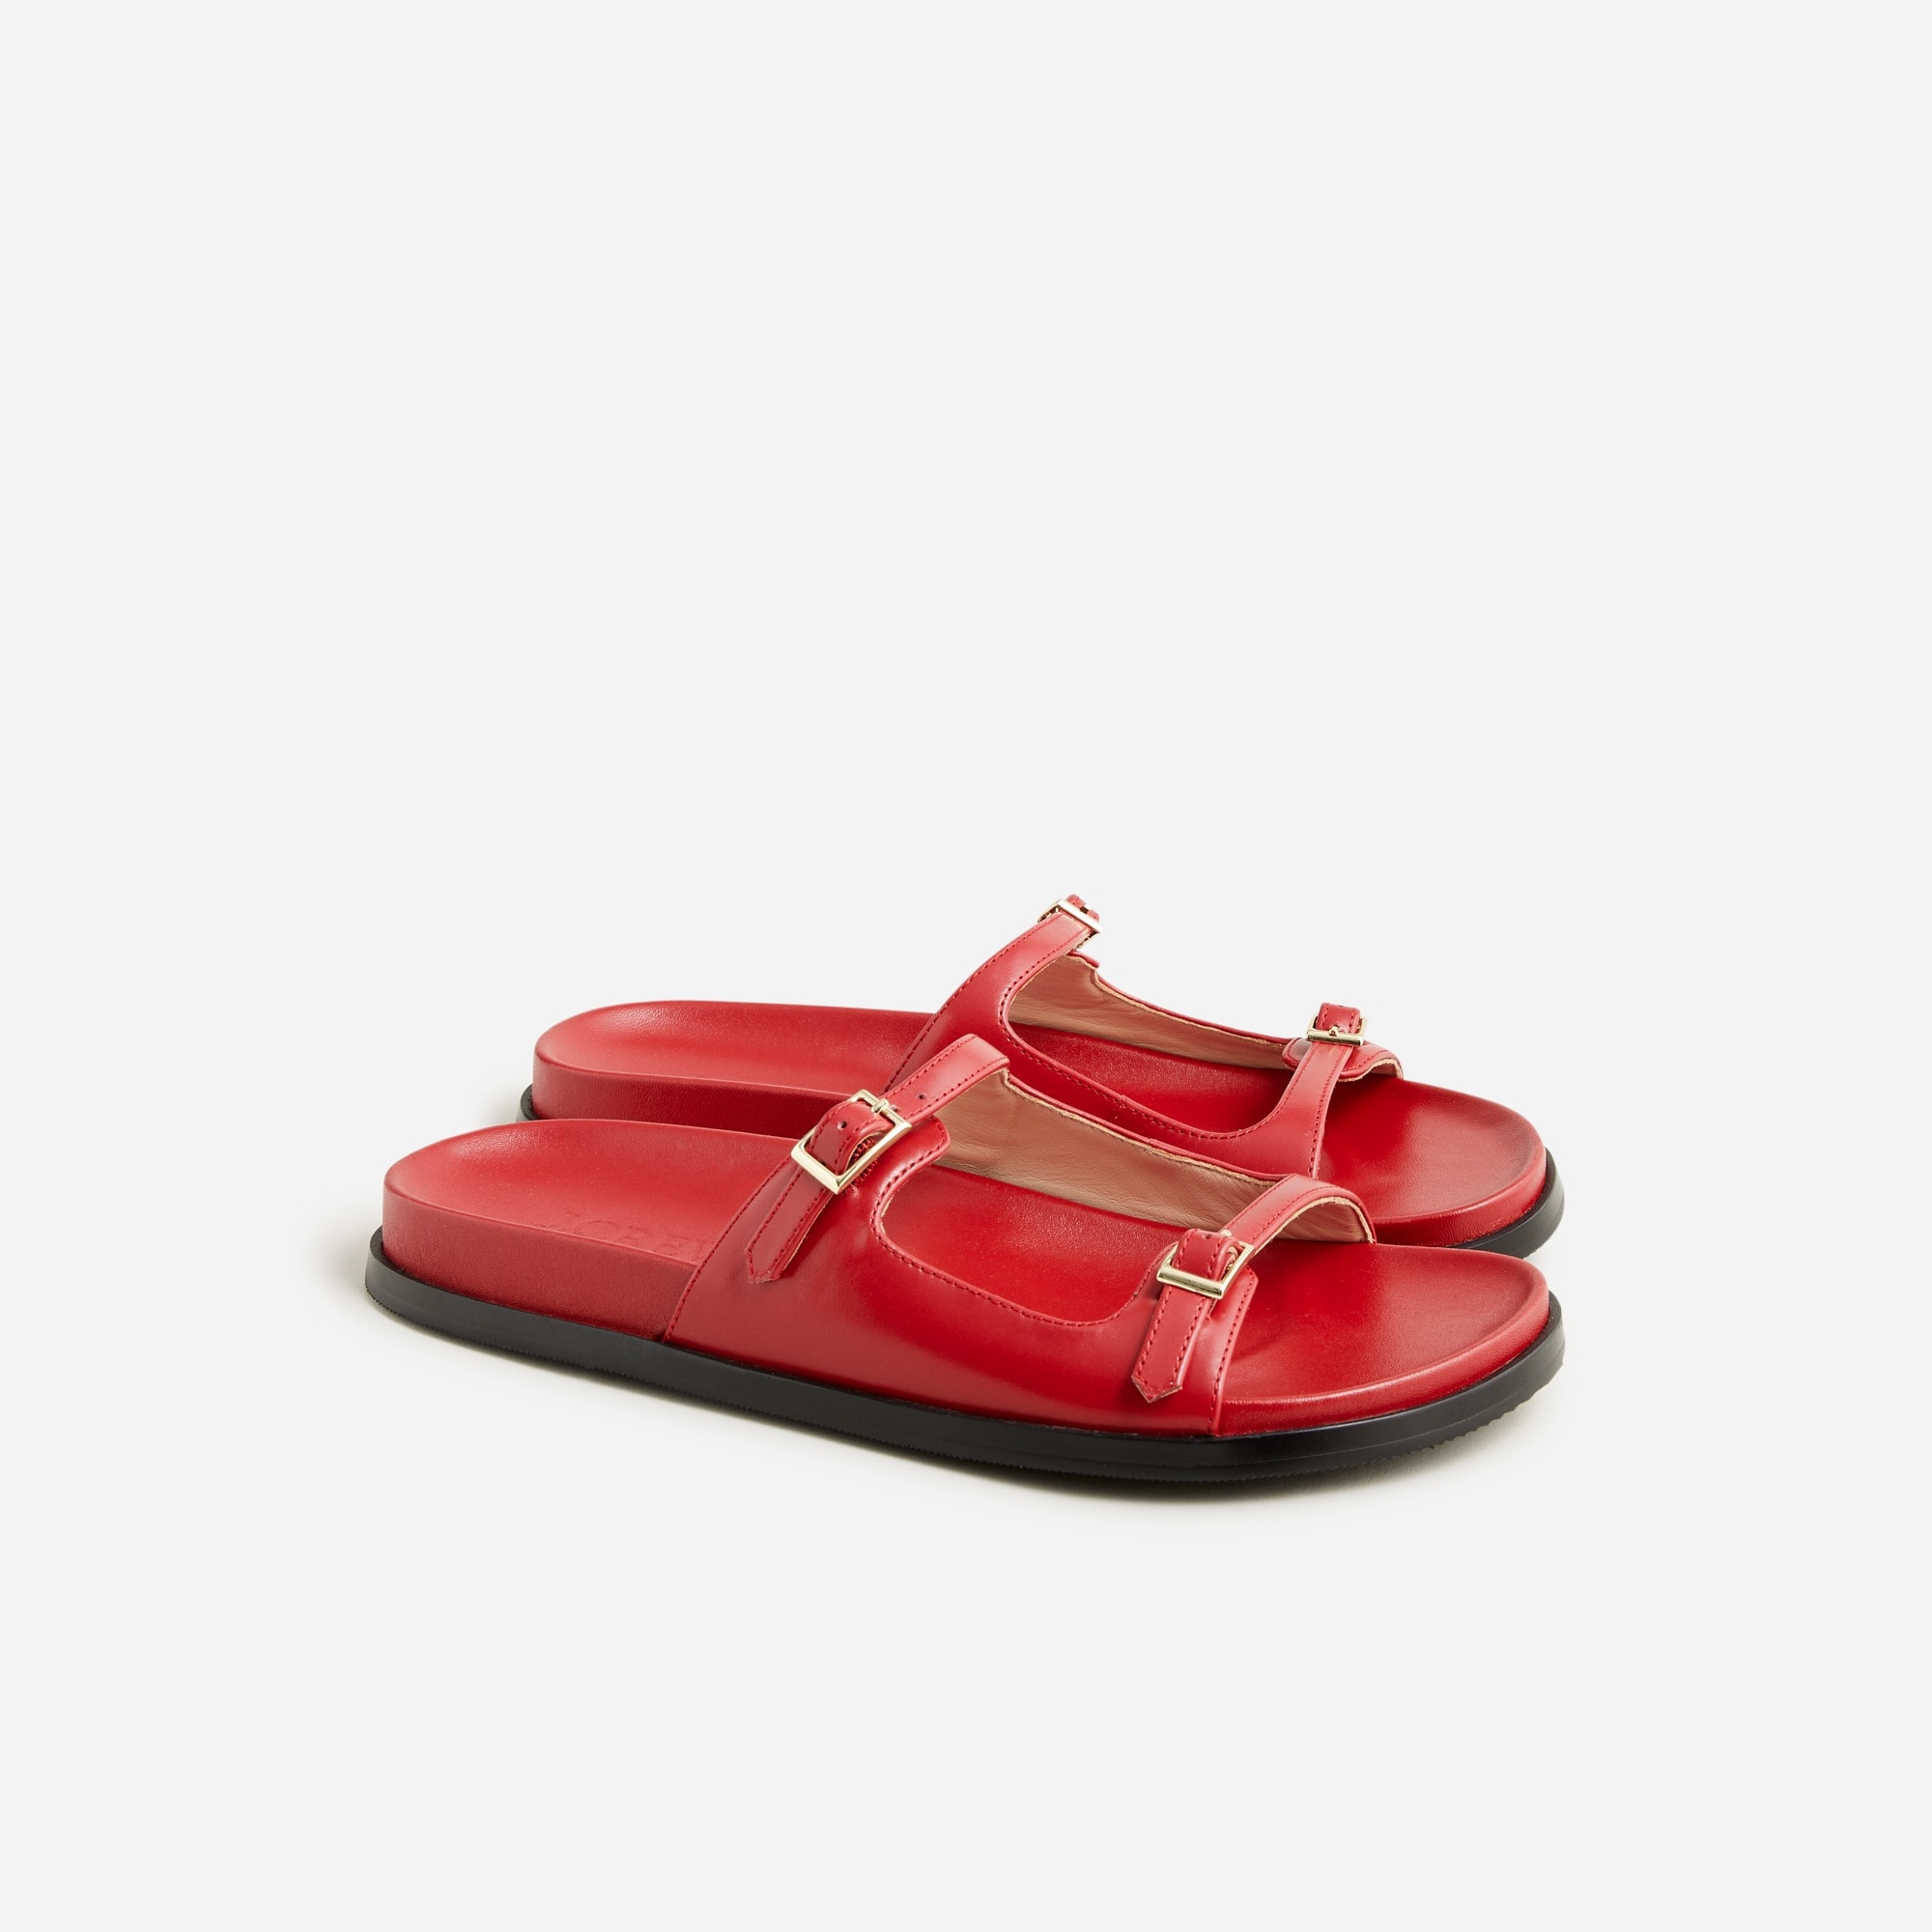 womens Colbie buckle sandals in leather